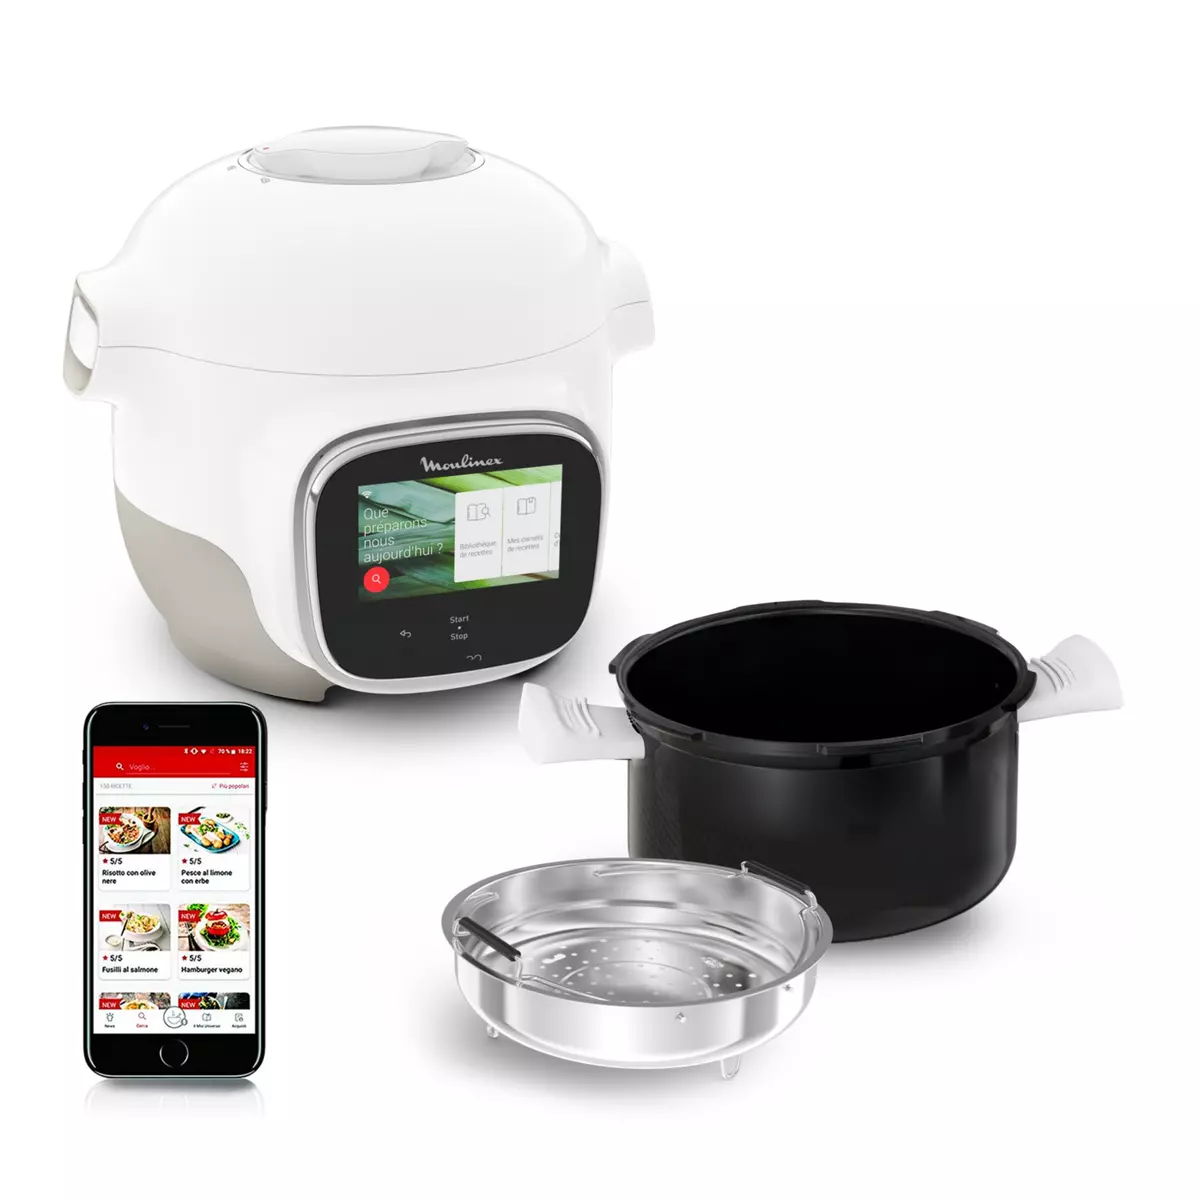 MOULINEX Multicuiseur intelligent cookeo compact touch wifi MINI